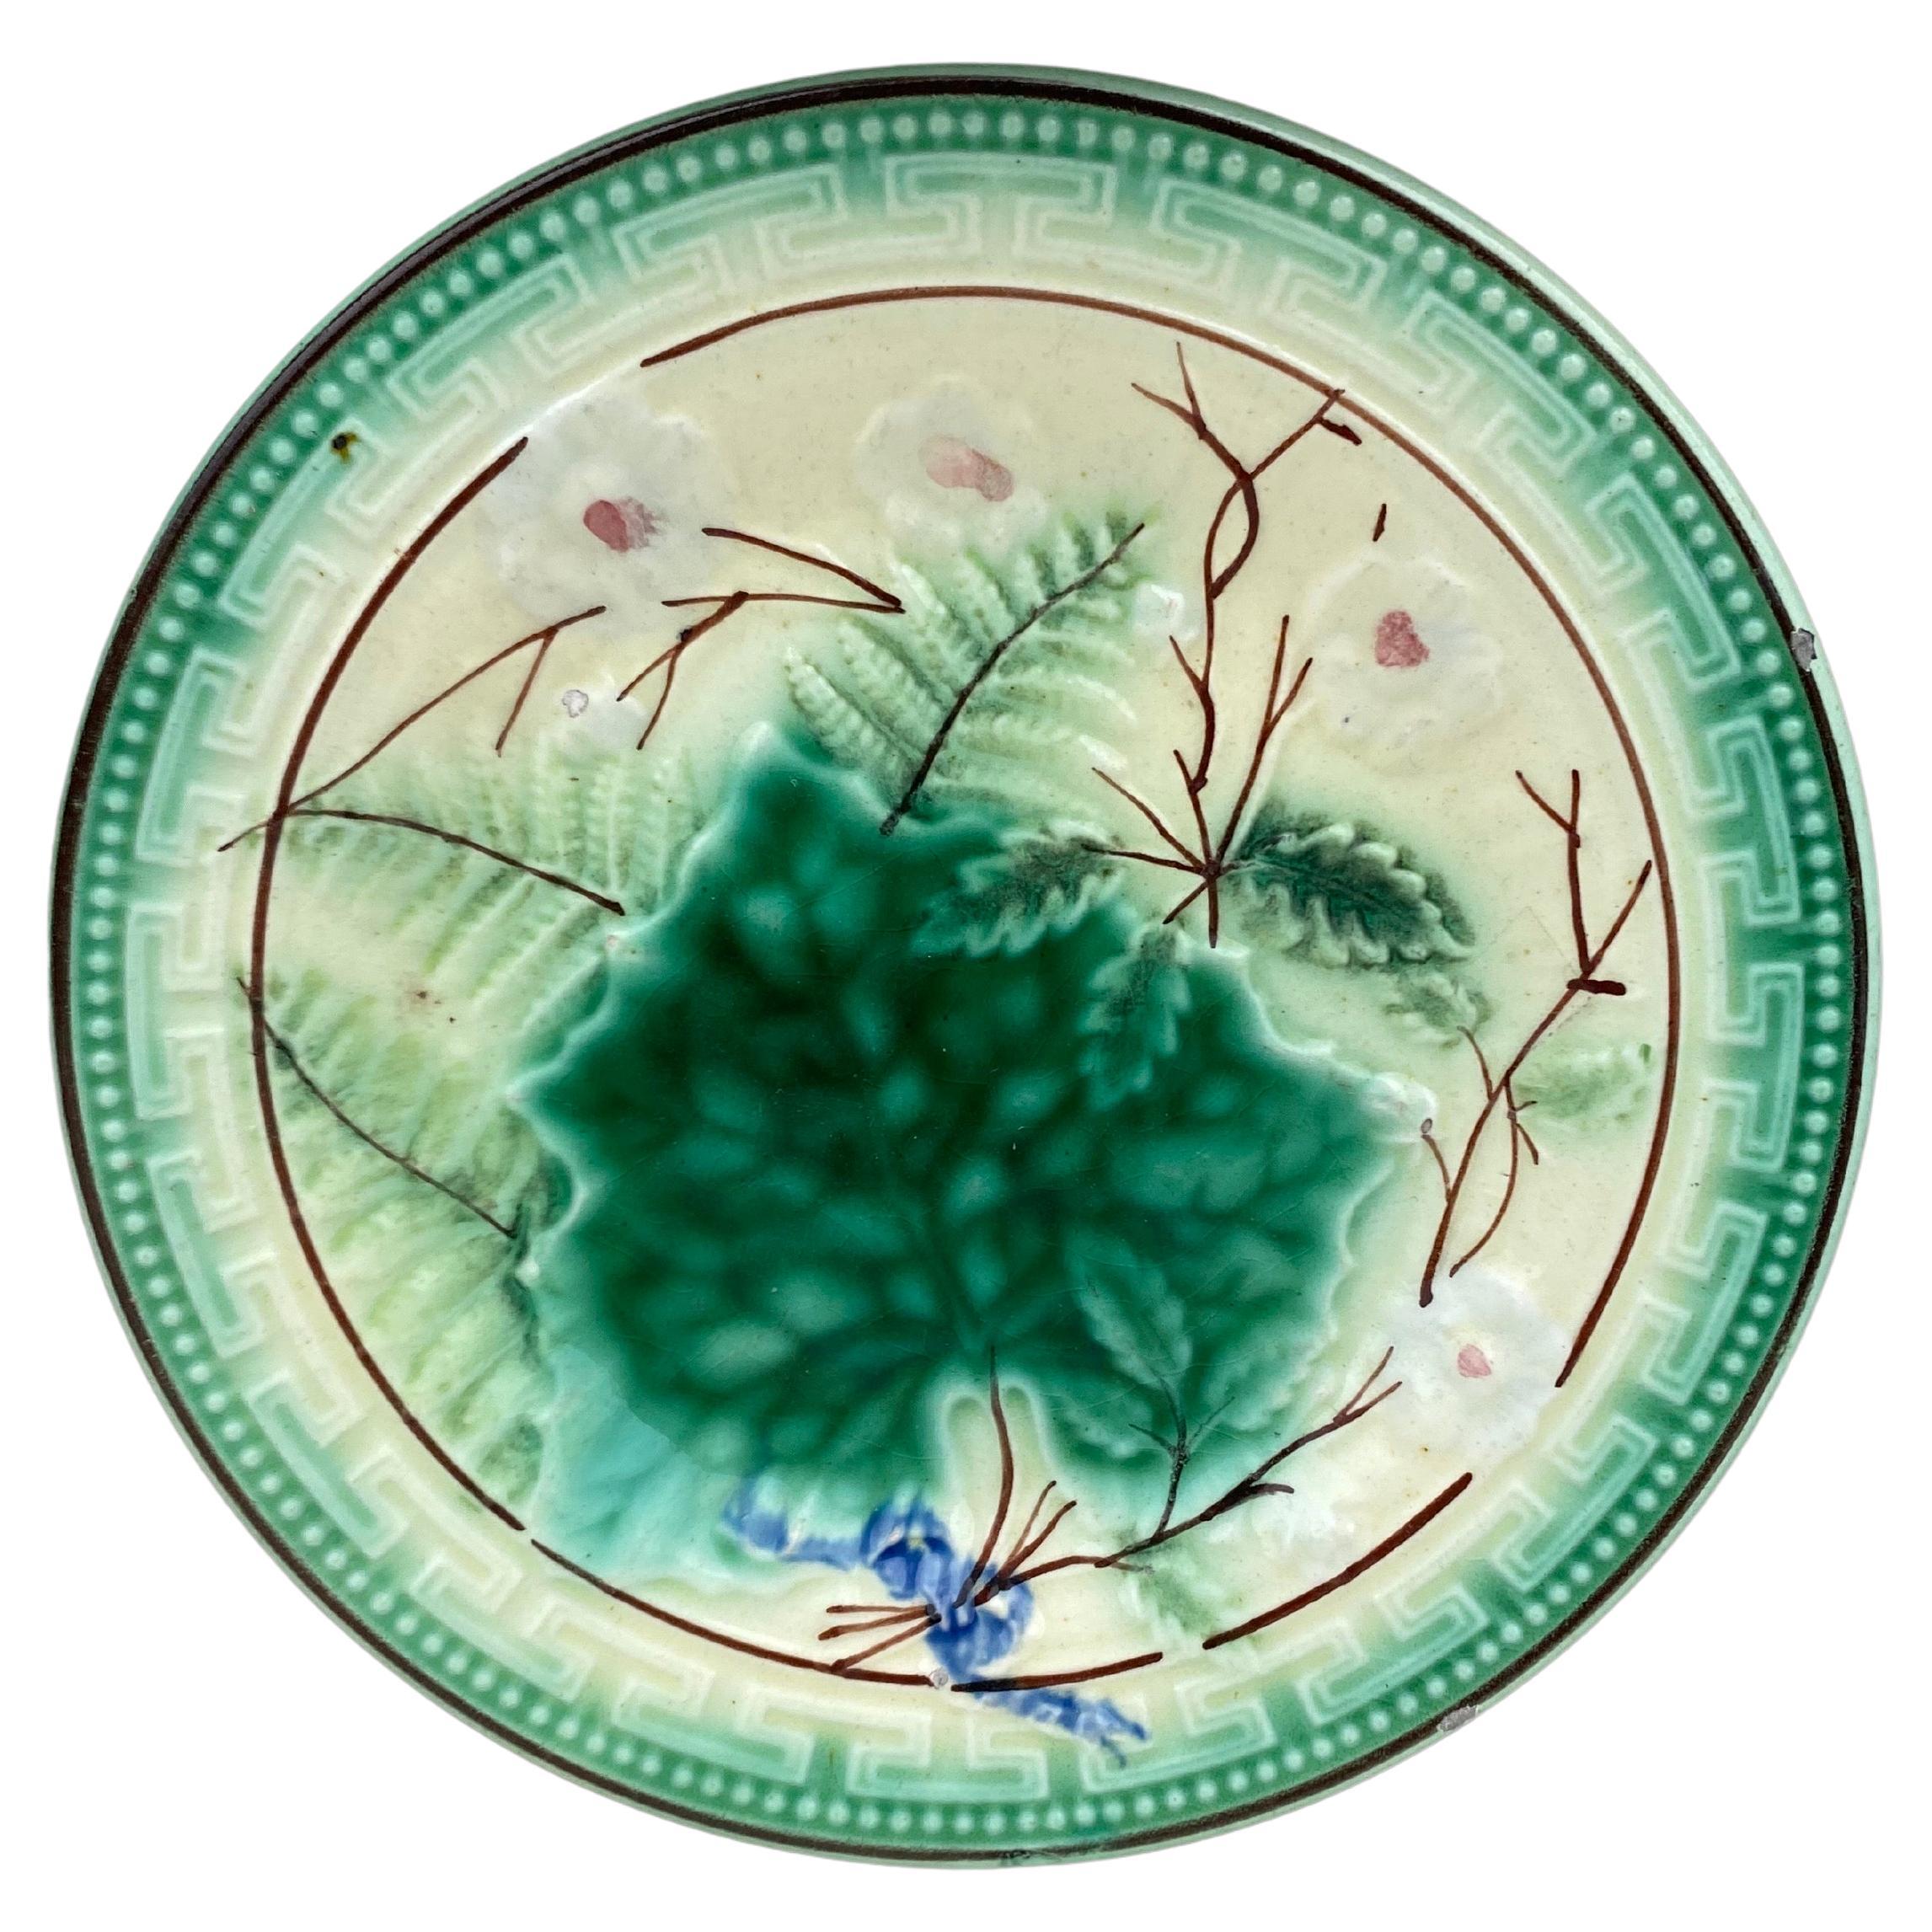 What is a majolica plate?